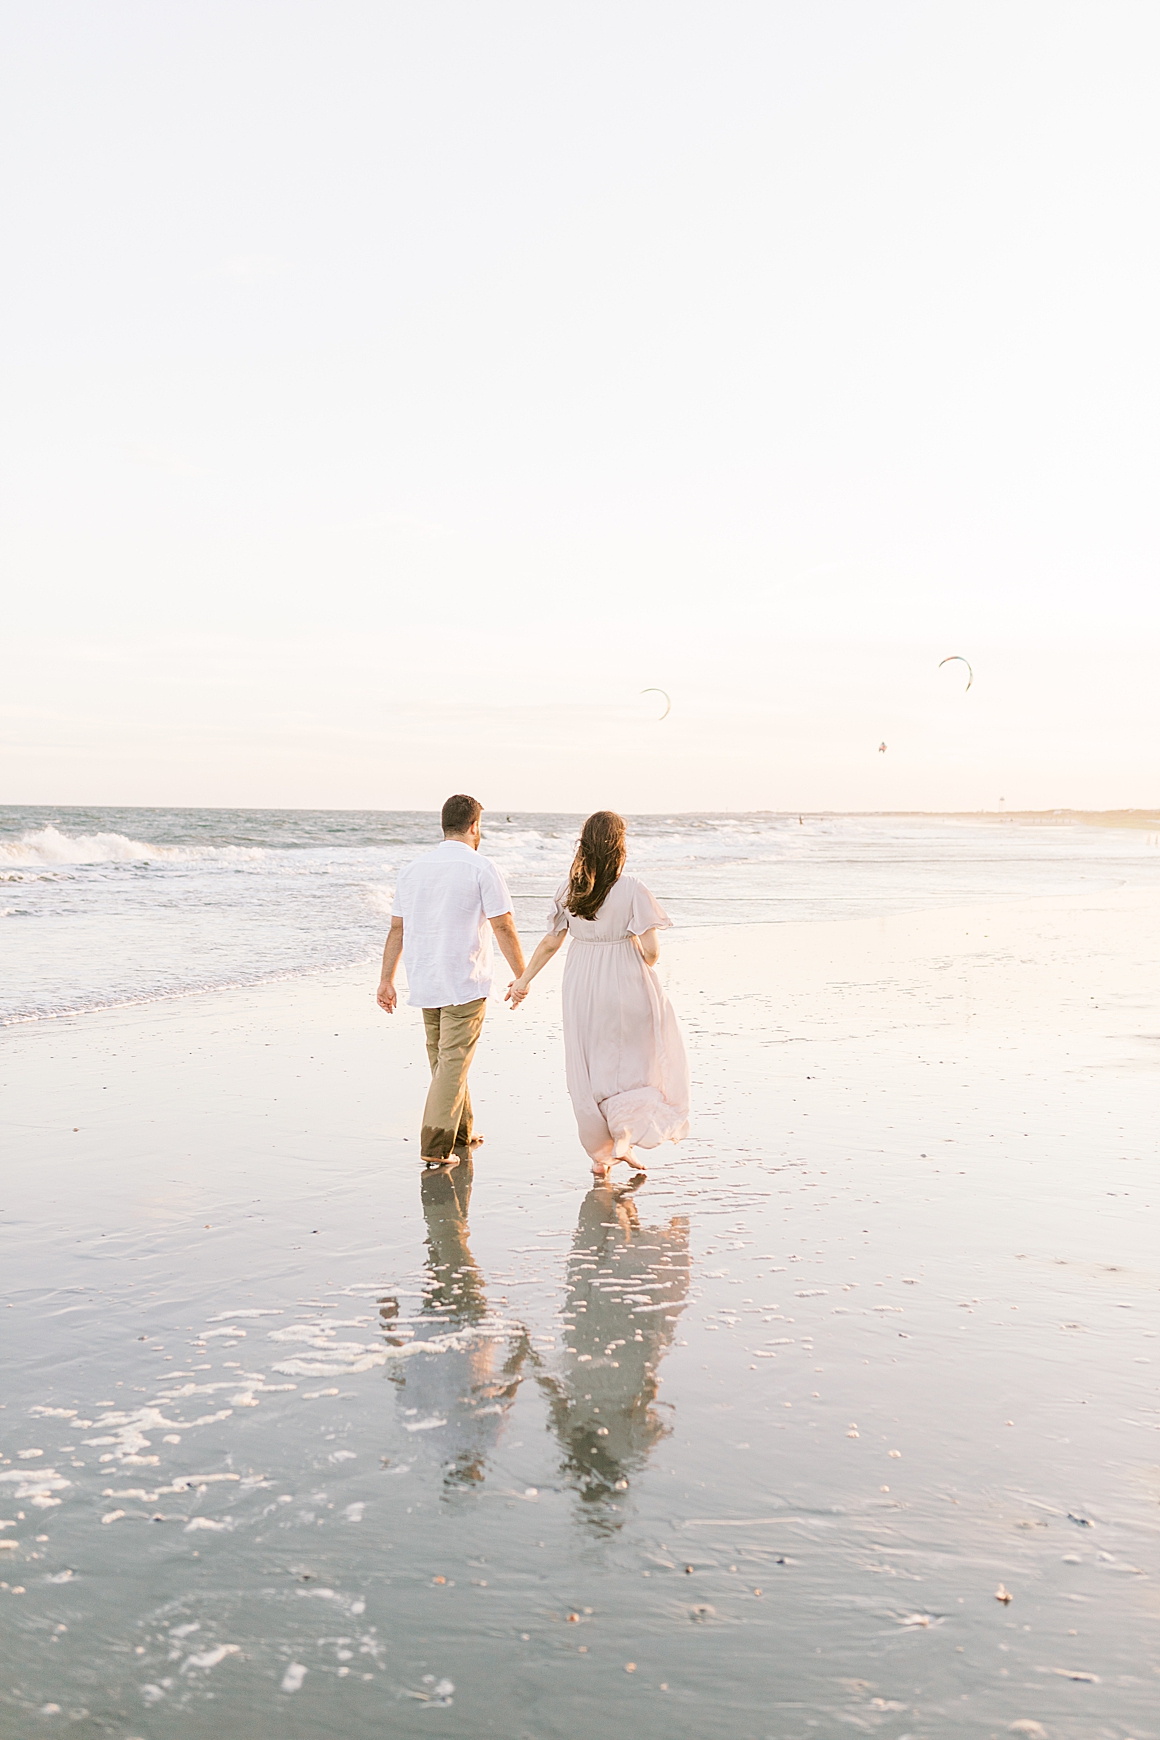 Golden hour sunset maternity session in Charleston, SC on Isle of Palms. Photos by Caitlyn Motycka Photography.